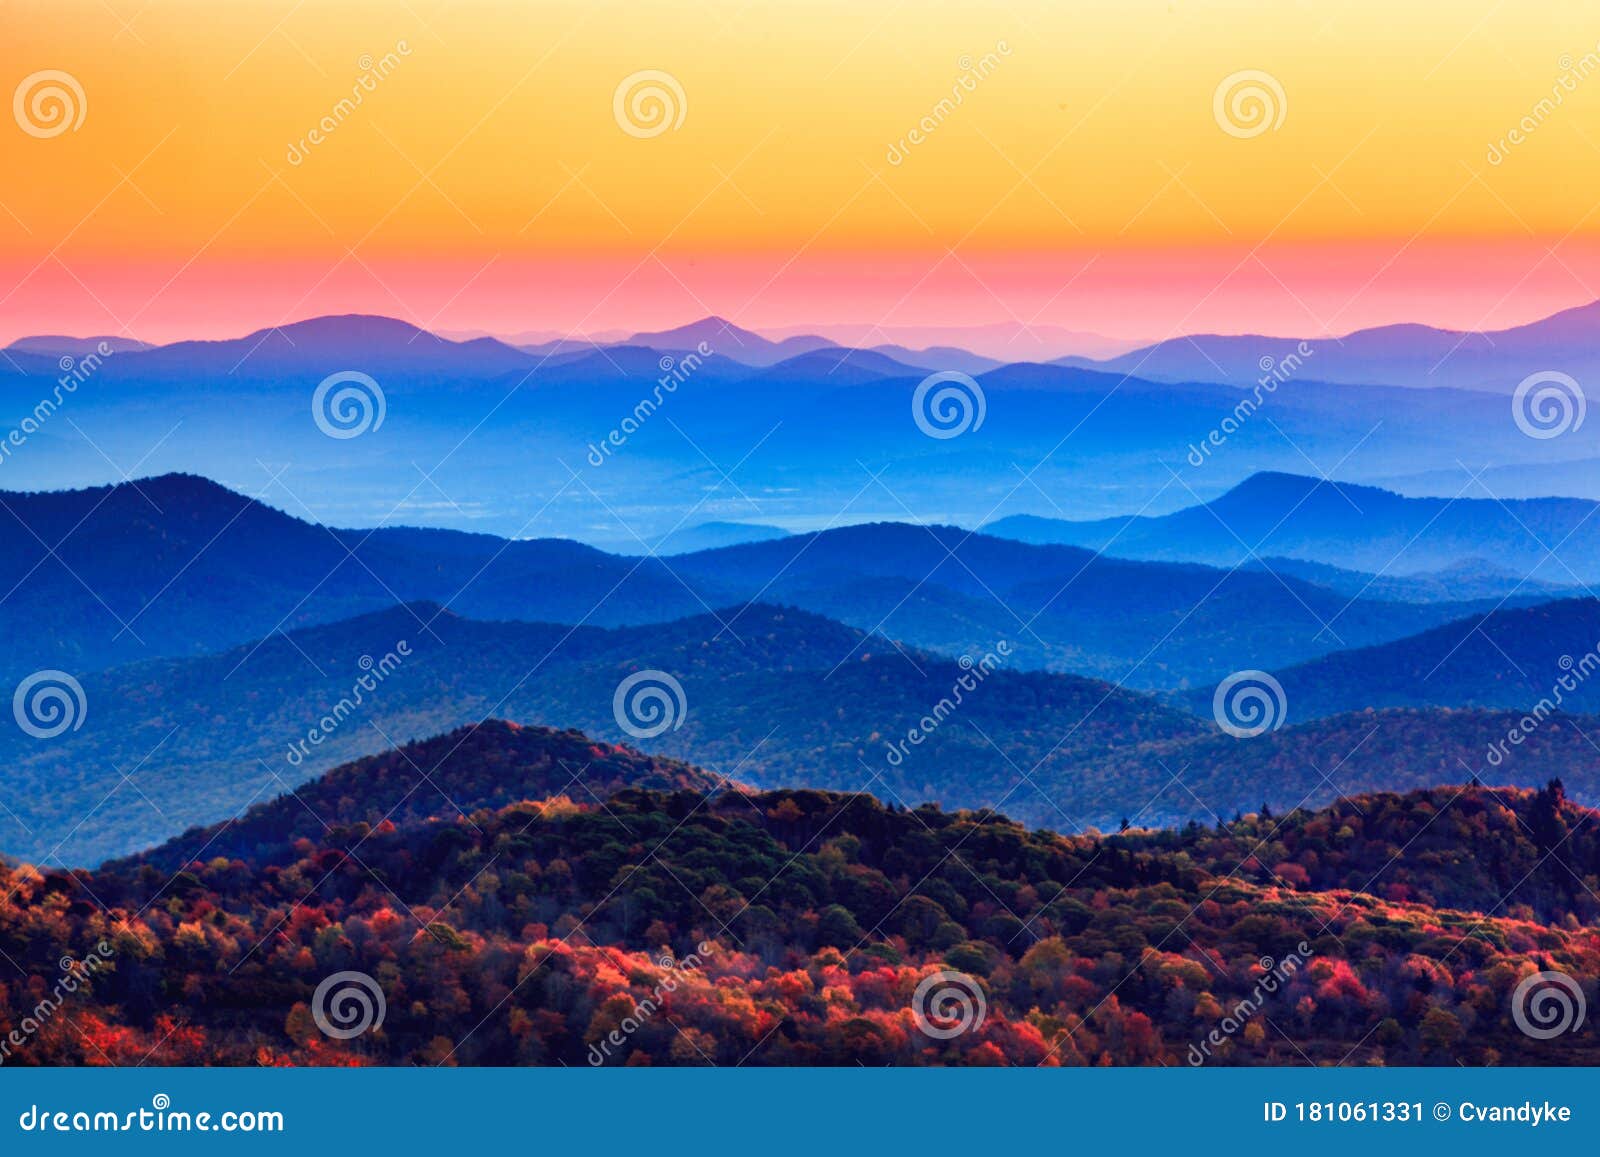 Sunrise Sky Over Peaks And Valley Blue Ridge Mountains Stock Image